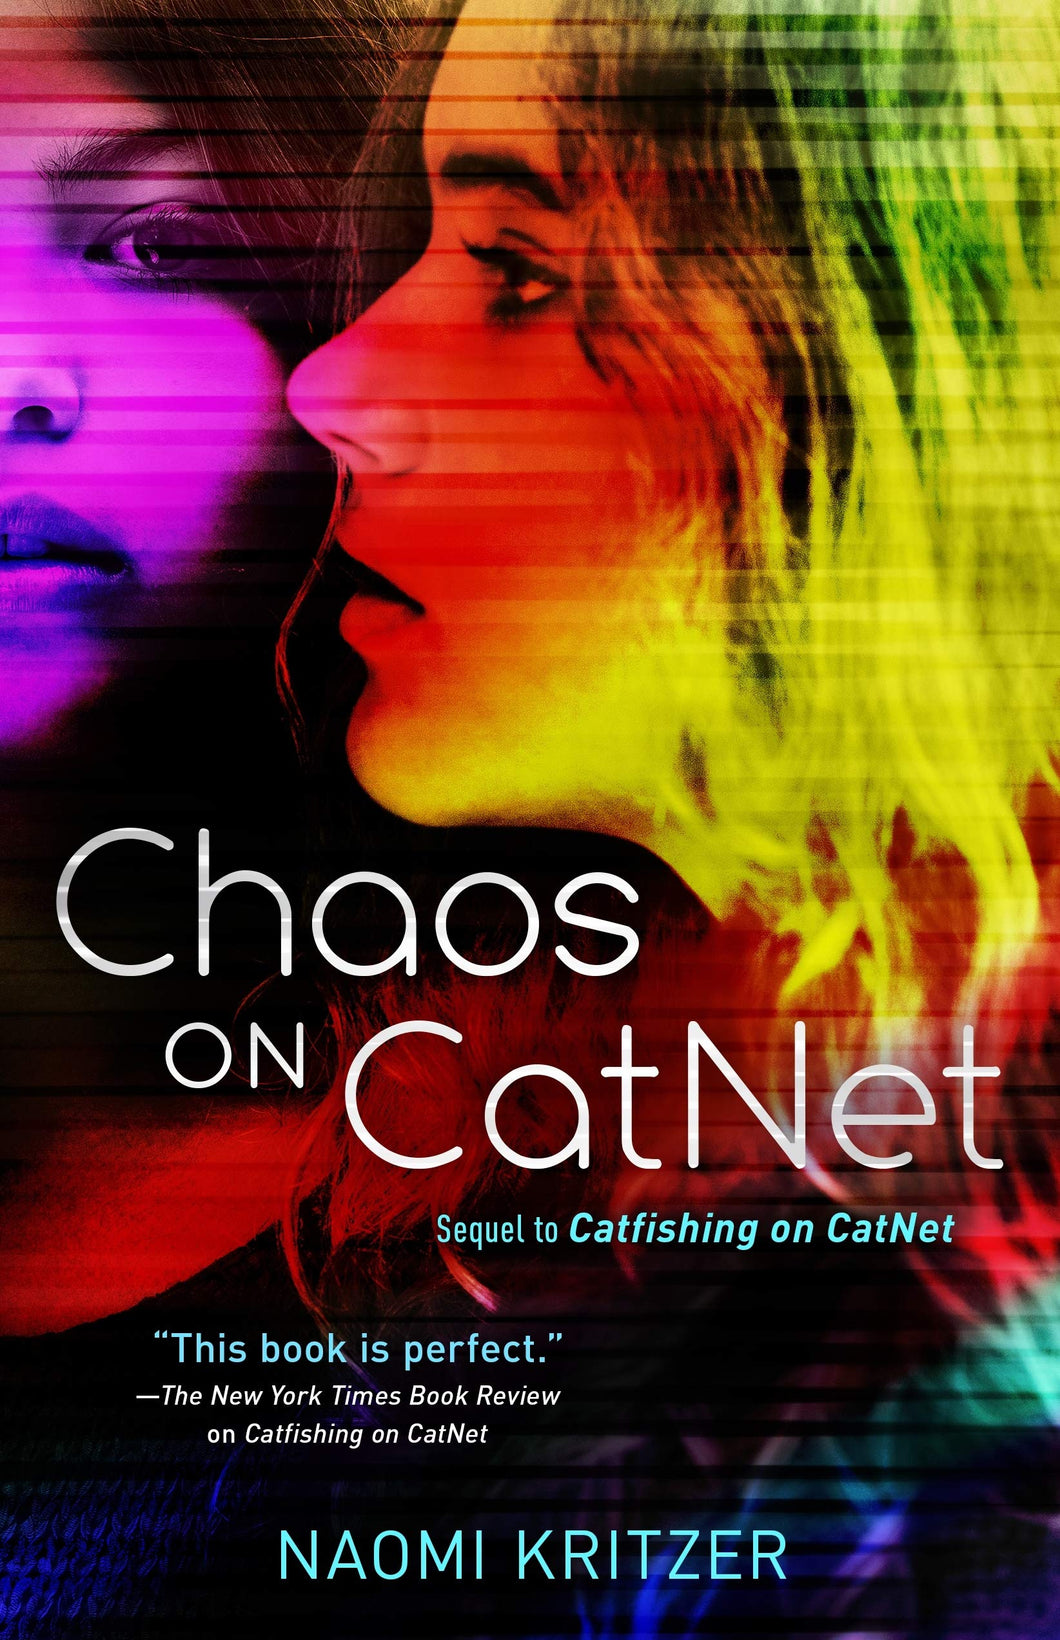 Chaos on CatNet: Sequel to Catfishing on CatNet [by Naomi Kritzer]